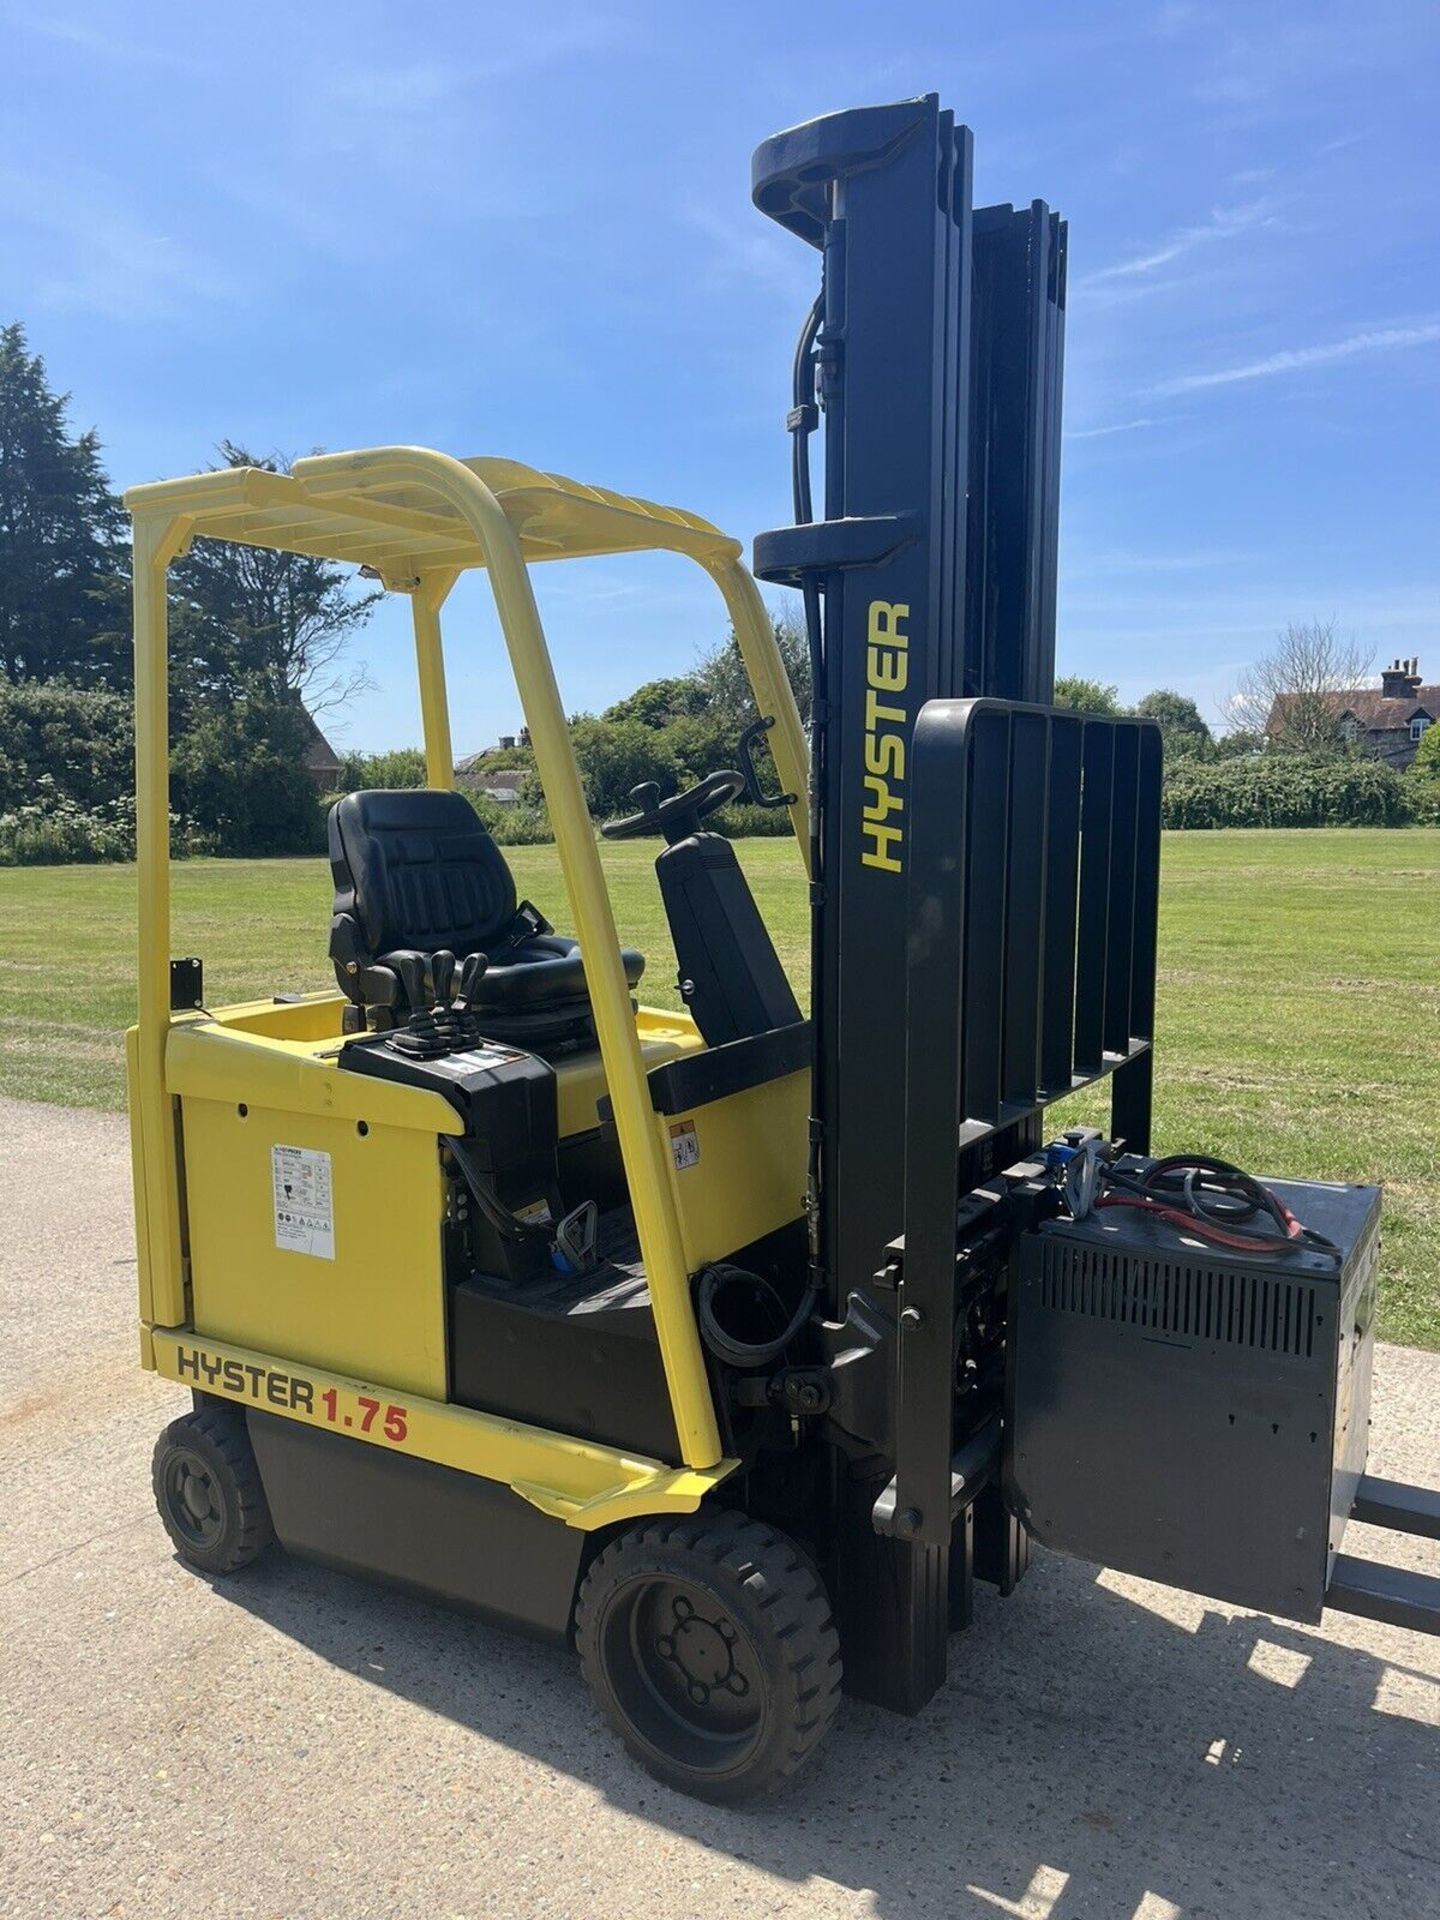 HYSTER, 1.75 Ton Electric Forklift Truck - Image 4 of 6